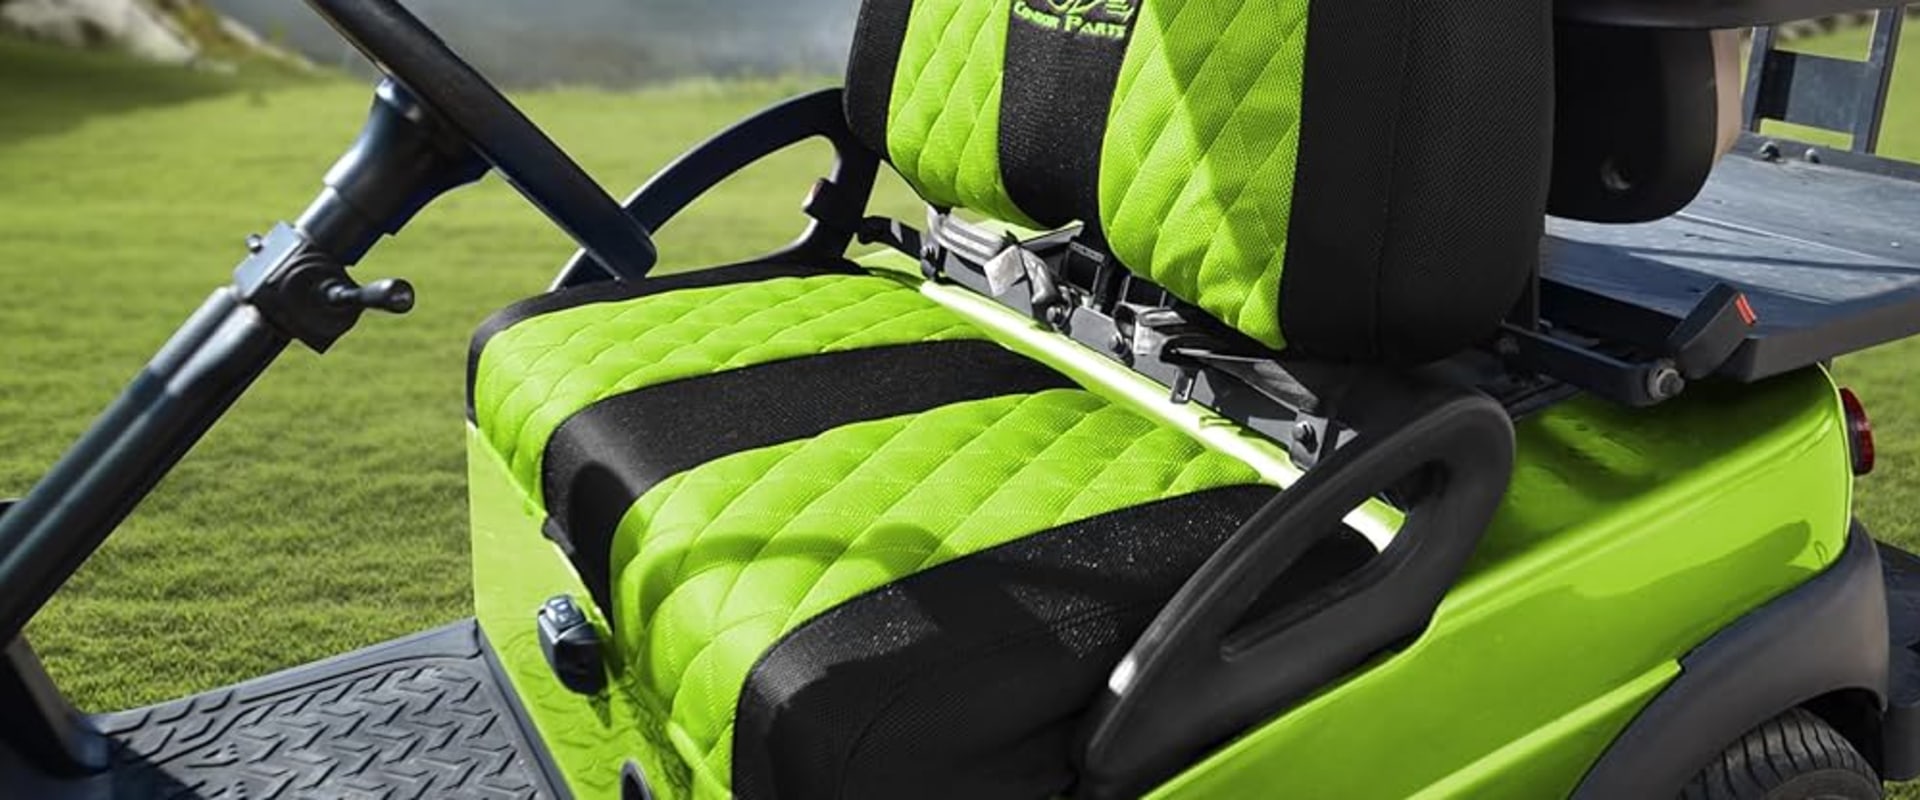 Durability and Longevity of Golf Cart Seat Covers: Protect and Personalize Your Seats